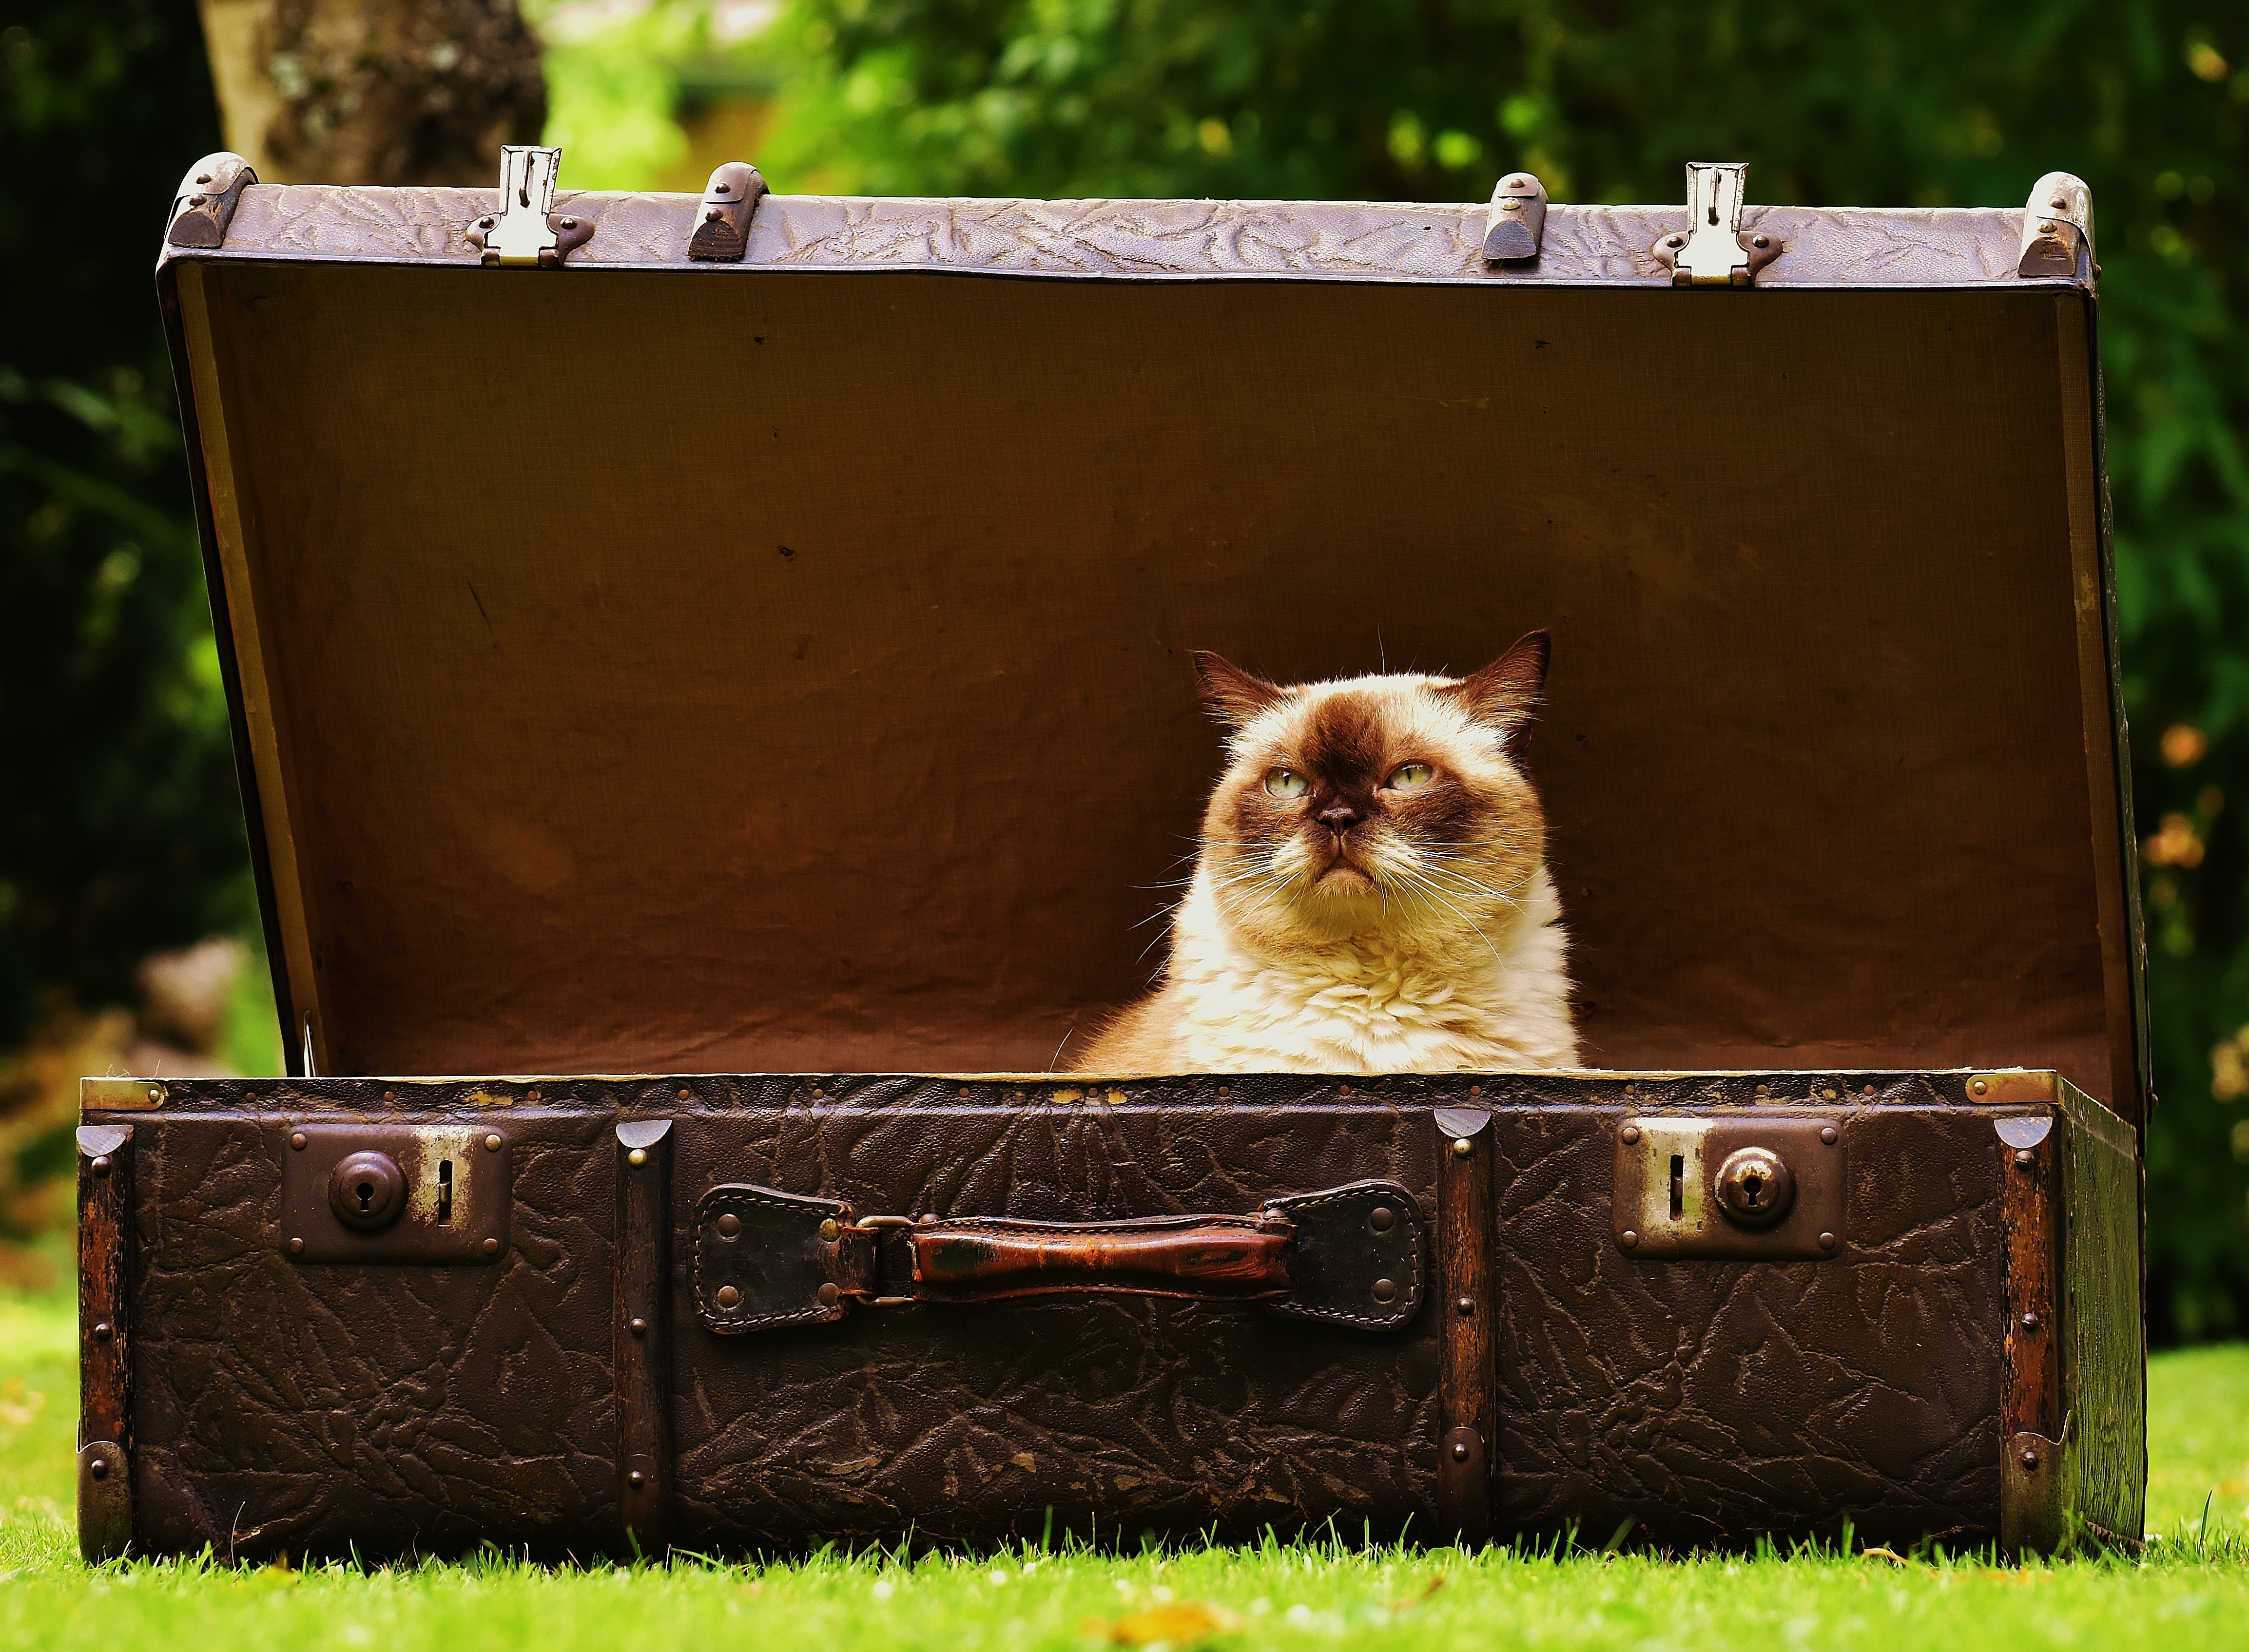 Download PC Wallpaper animal, cat, suitcase, cats